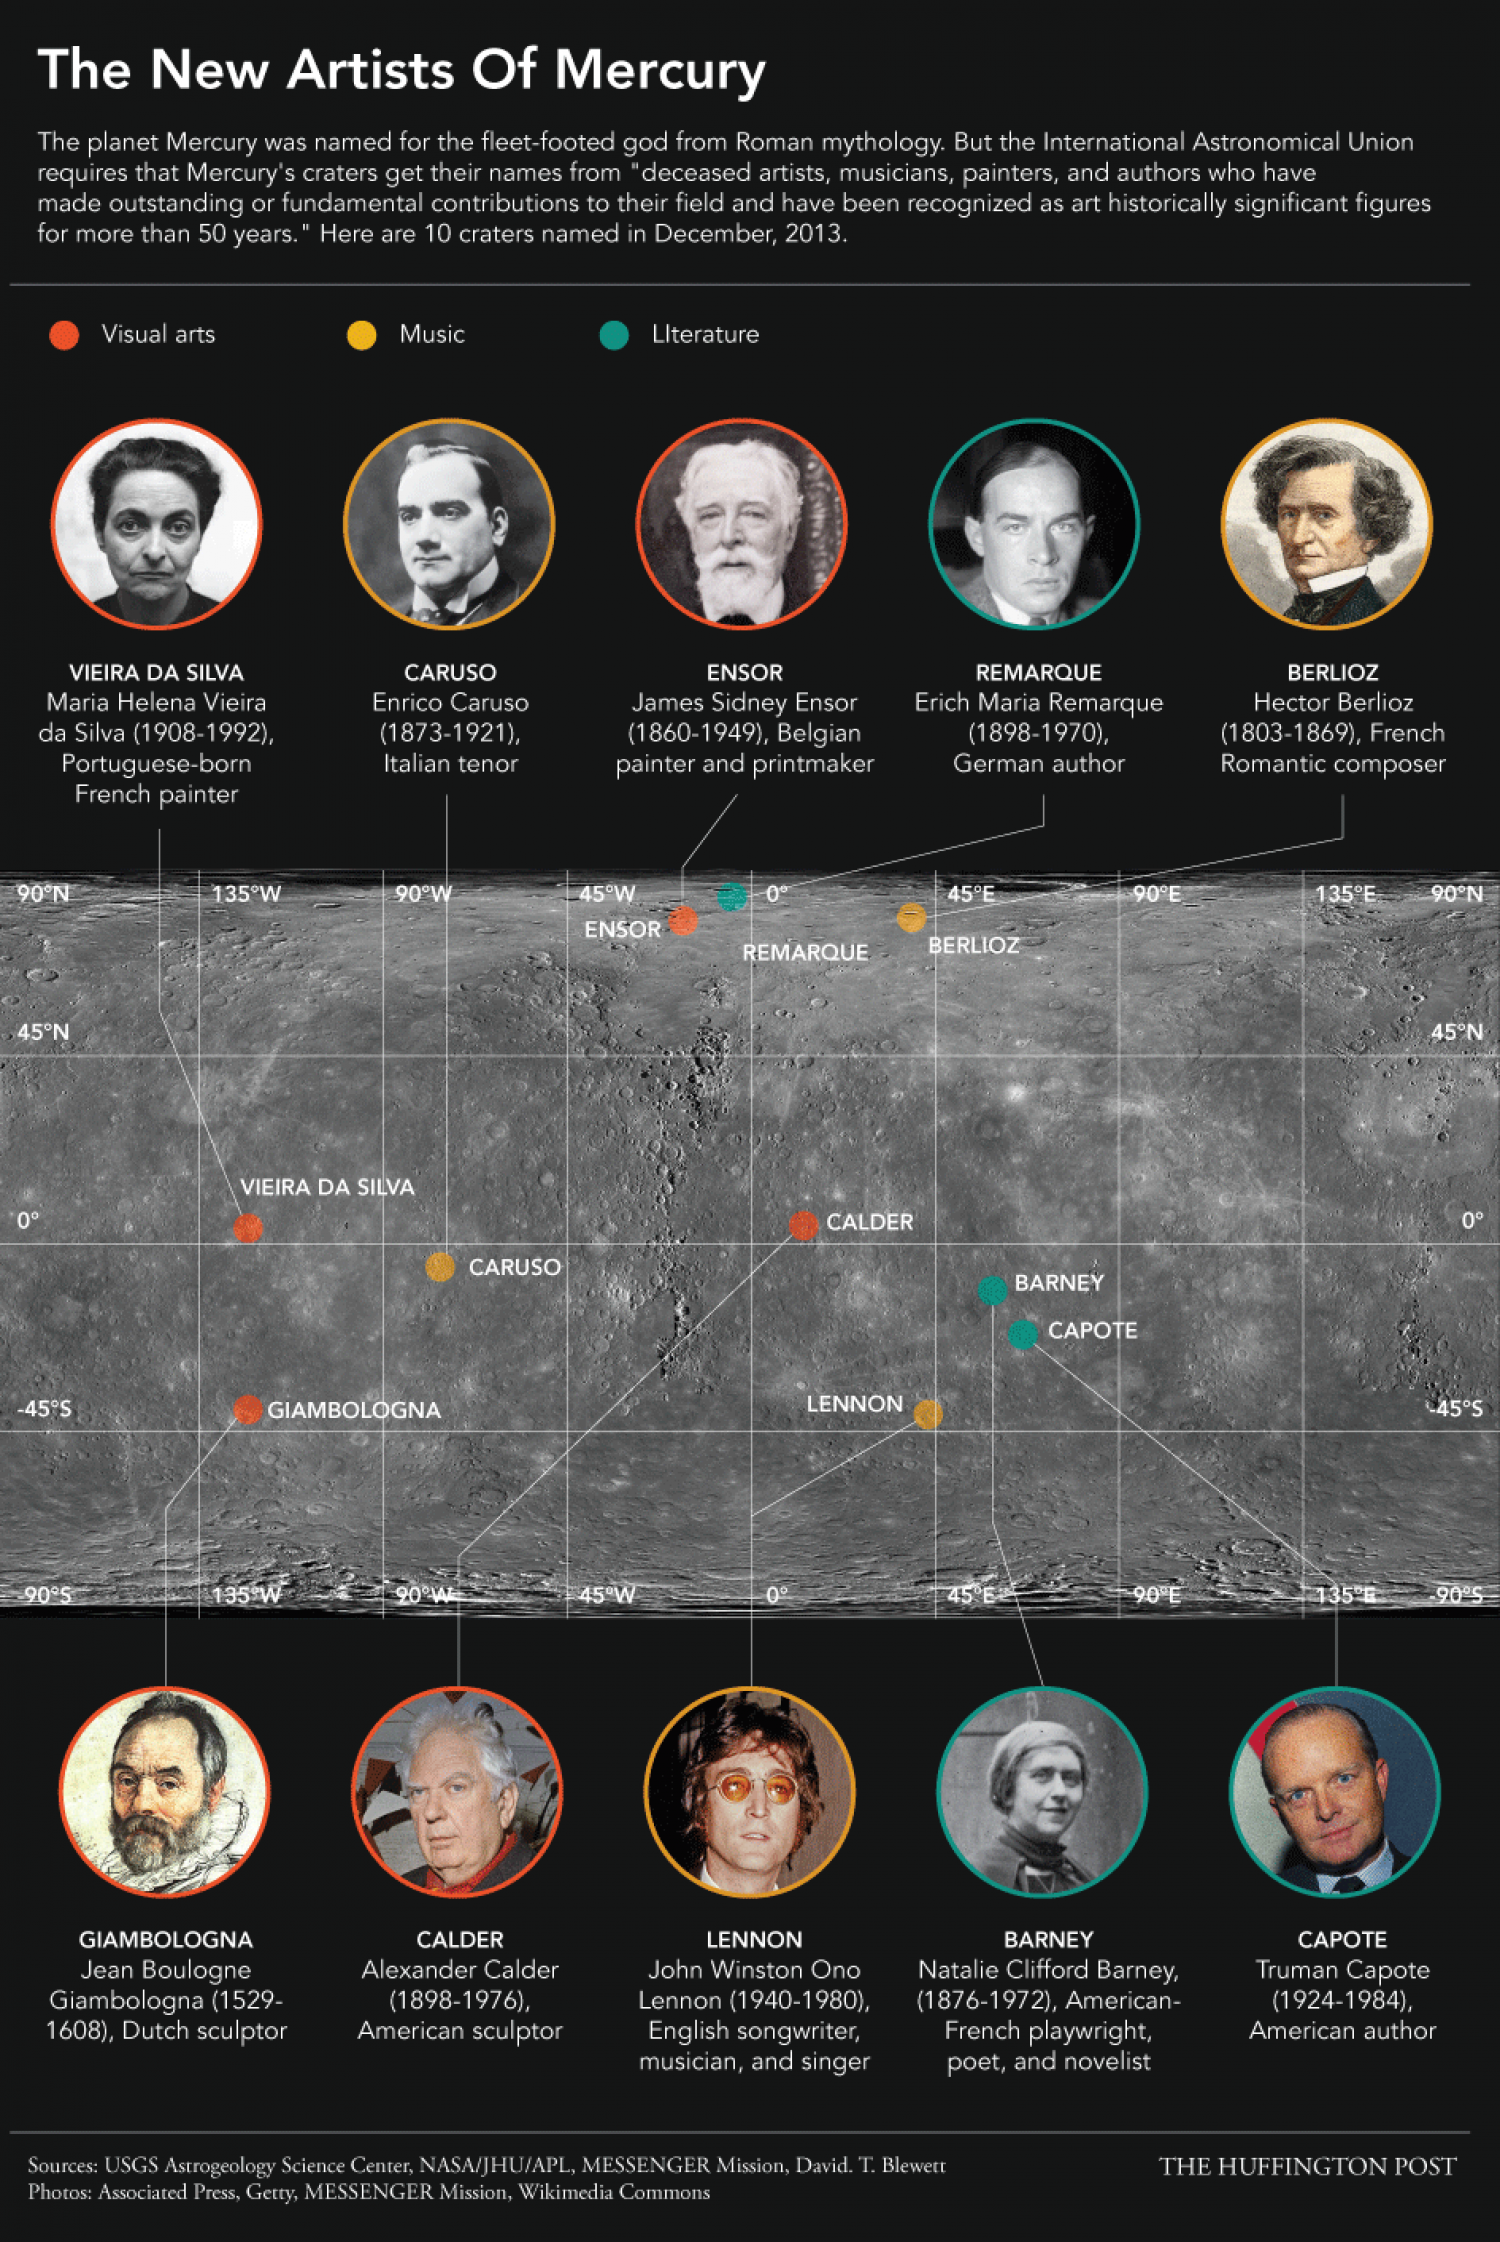 The New Artists of Mercury Infographic